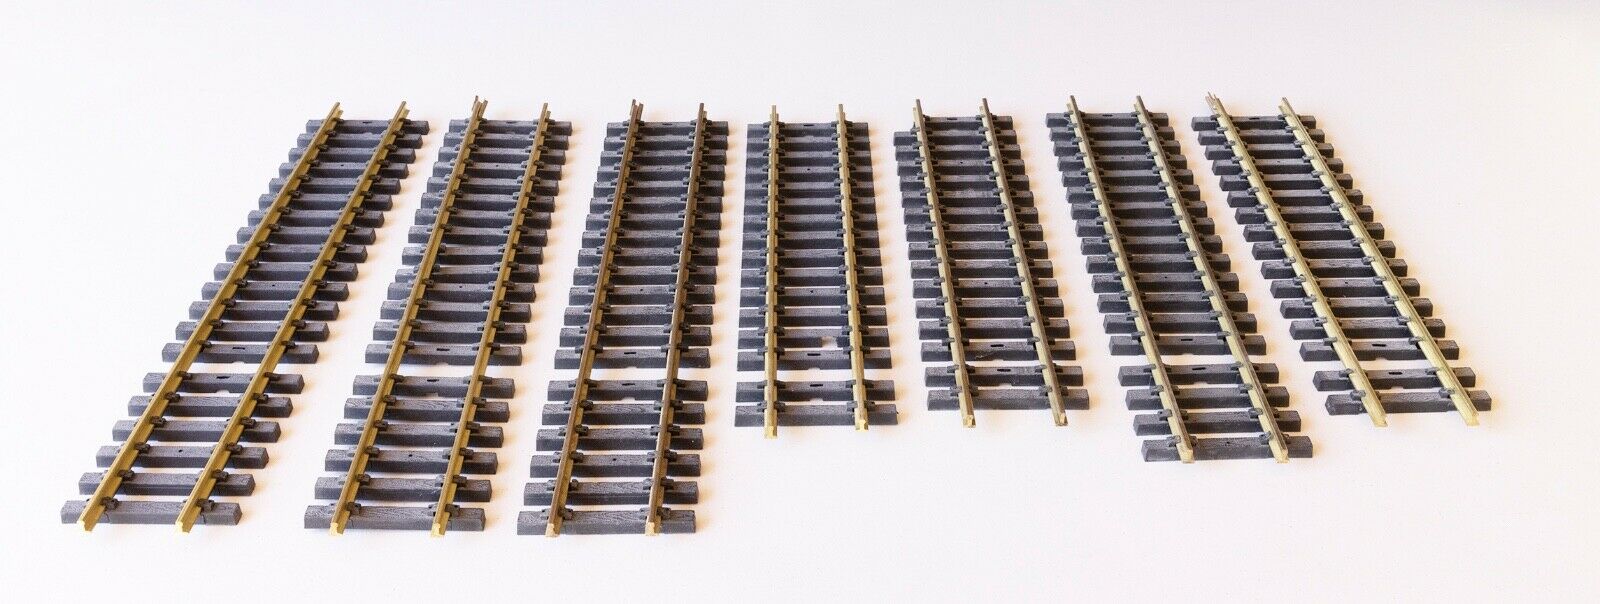 Aristocraft G Scale Brass Straight Track, Variable Lengths, 7 Pieces, Lot 15